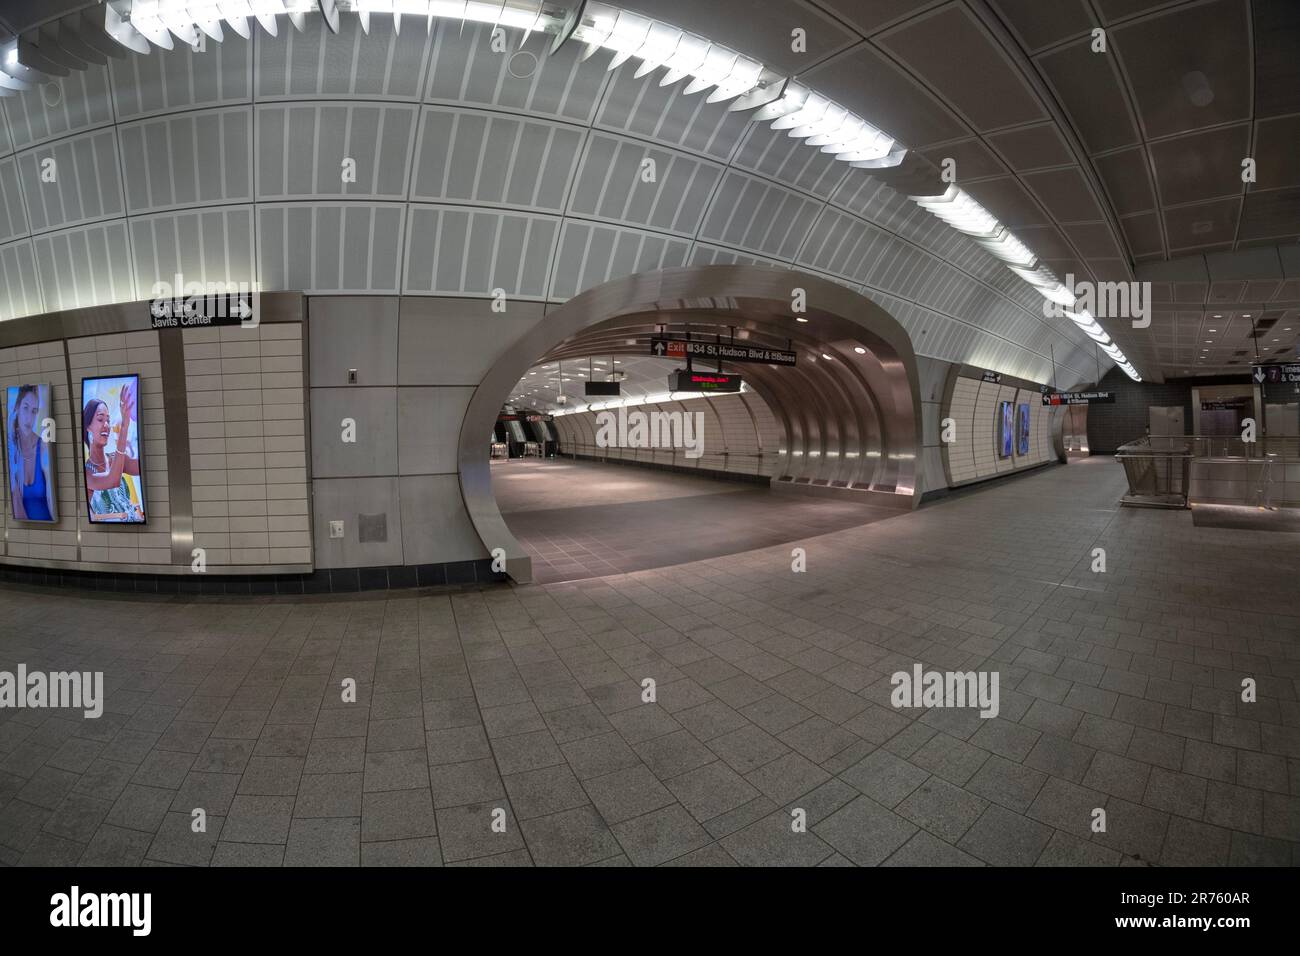 A fisheye lens view of the mezzanine of the last stop on the #7 subway and a walk to the exit on 34th Street Hudson Yards. In new York City. Stock Photo